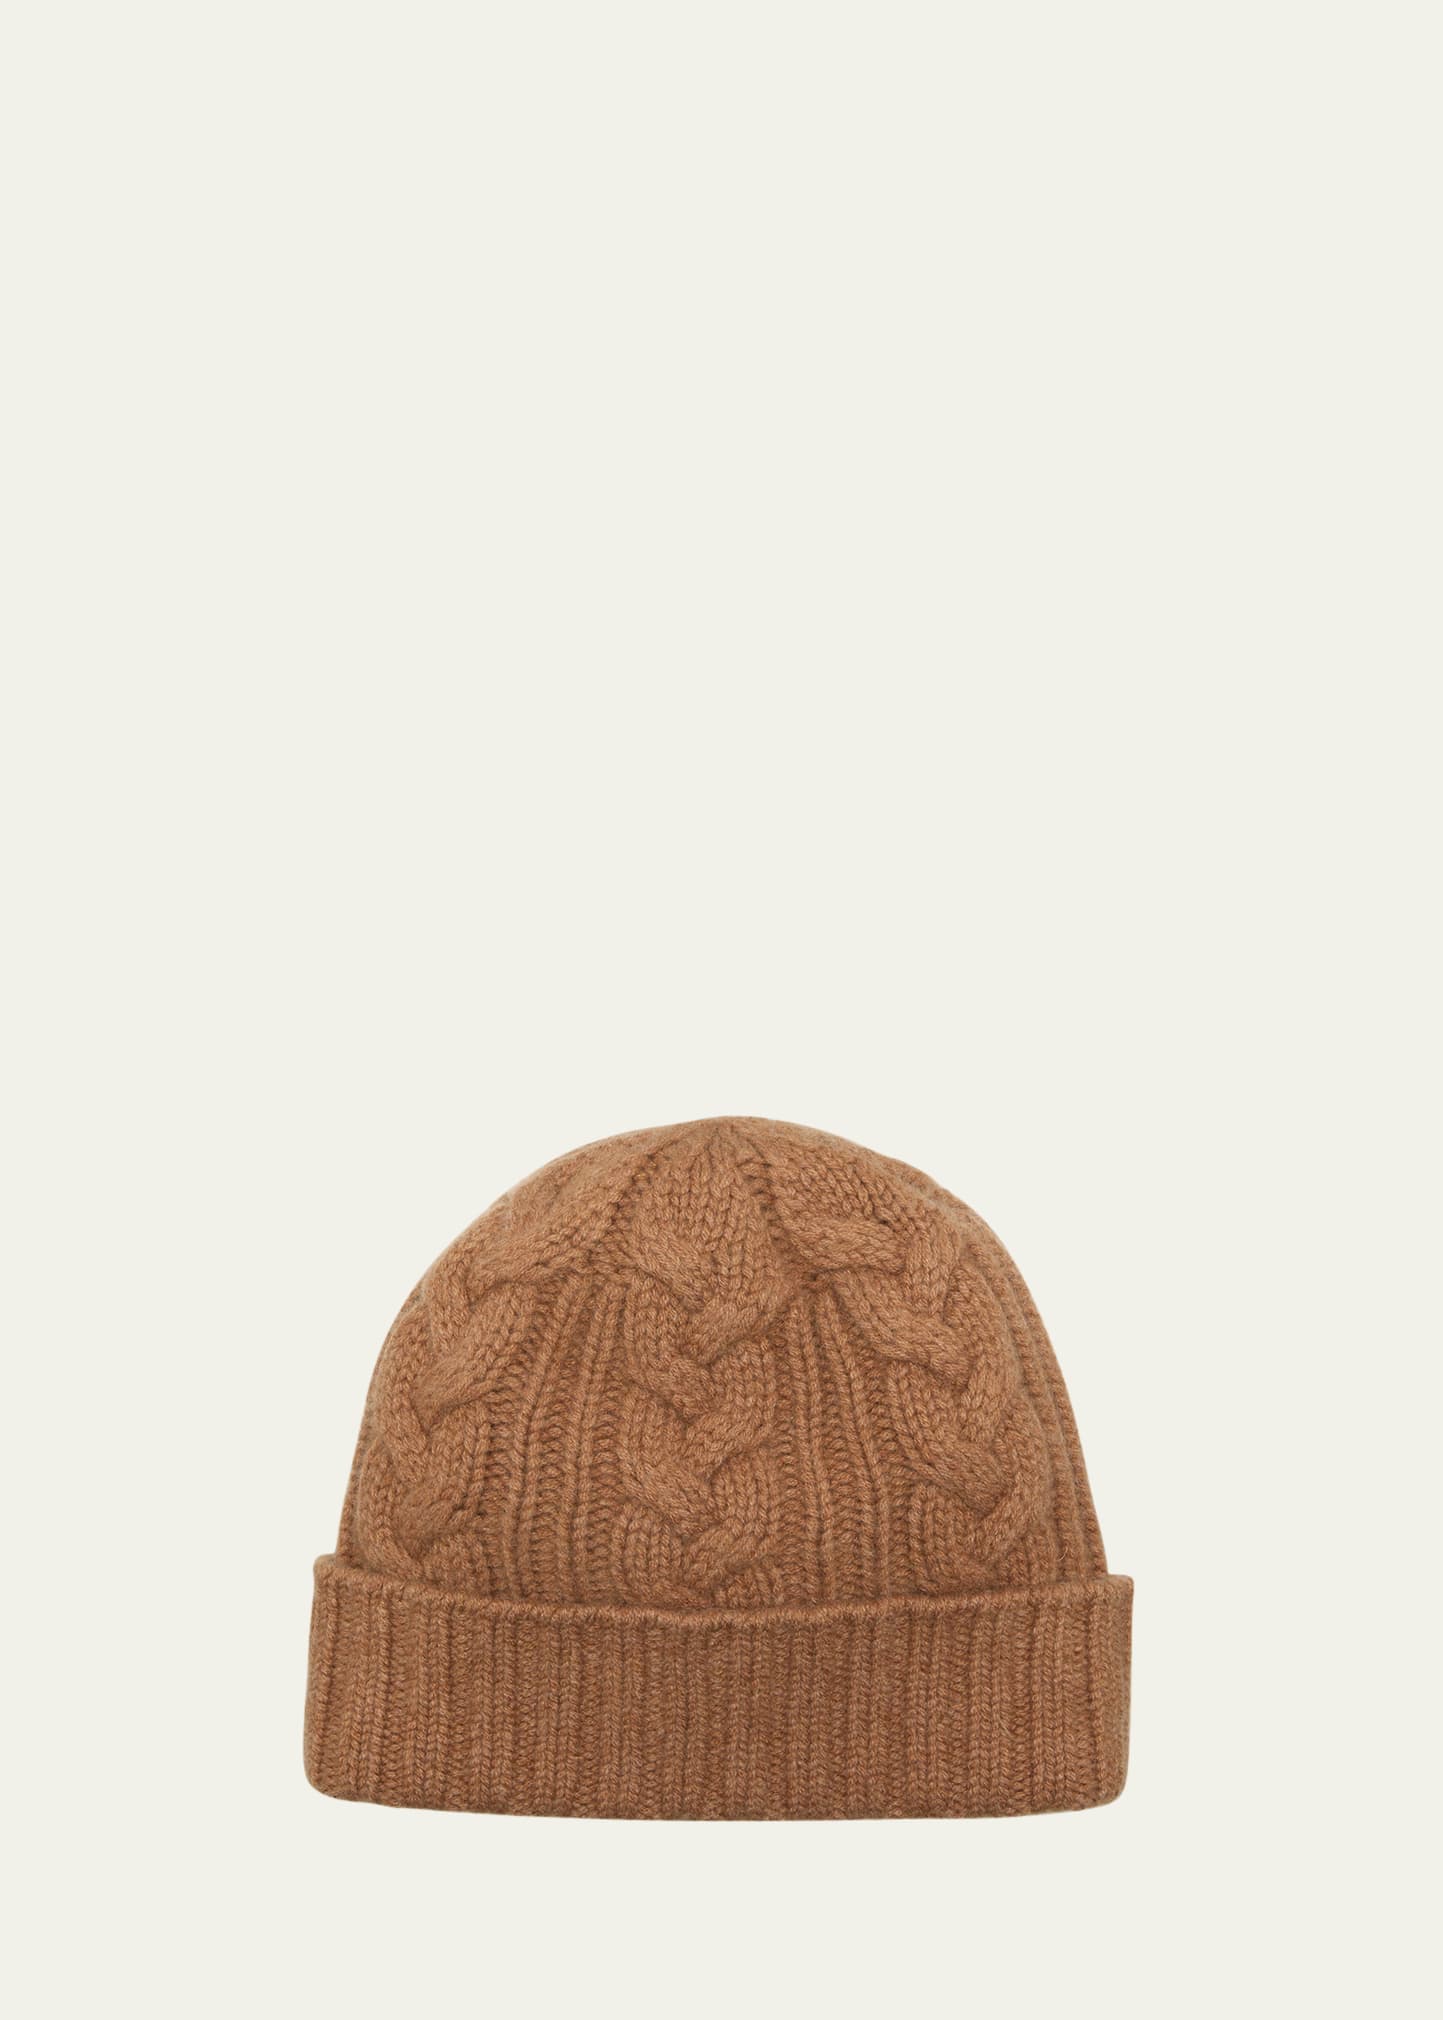 Bergdorf Goodman Men's Cable-knit Cuffed Cashmere Beanie Hat In Haystack